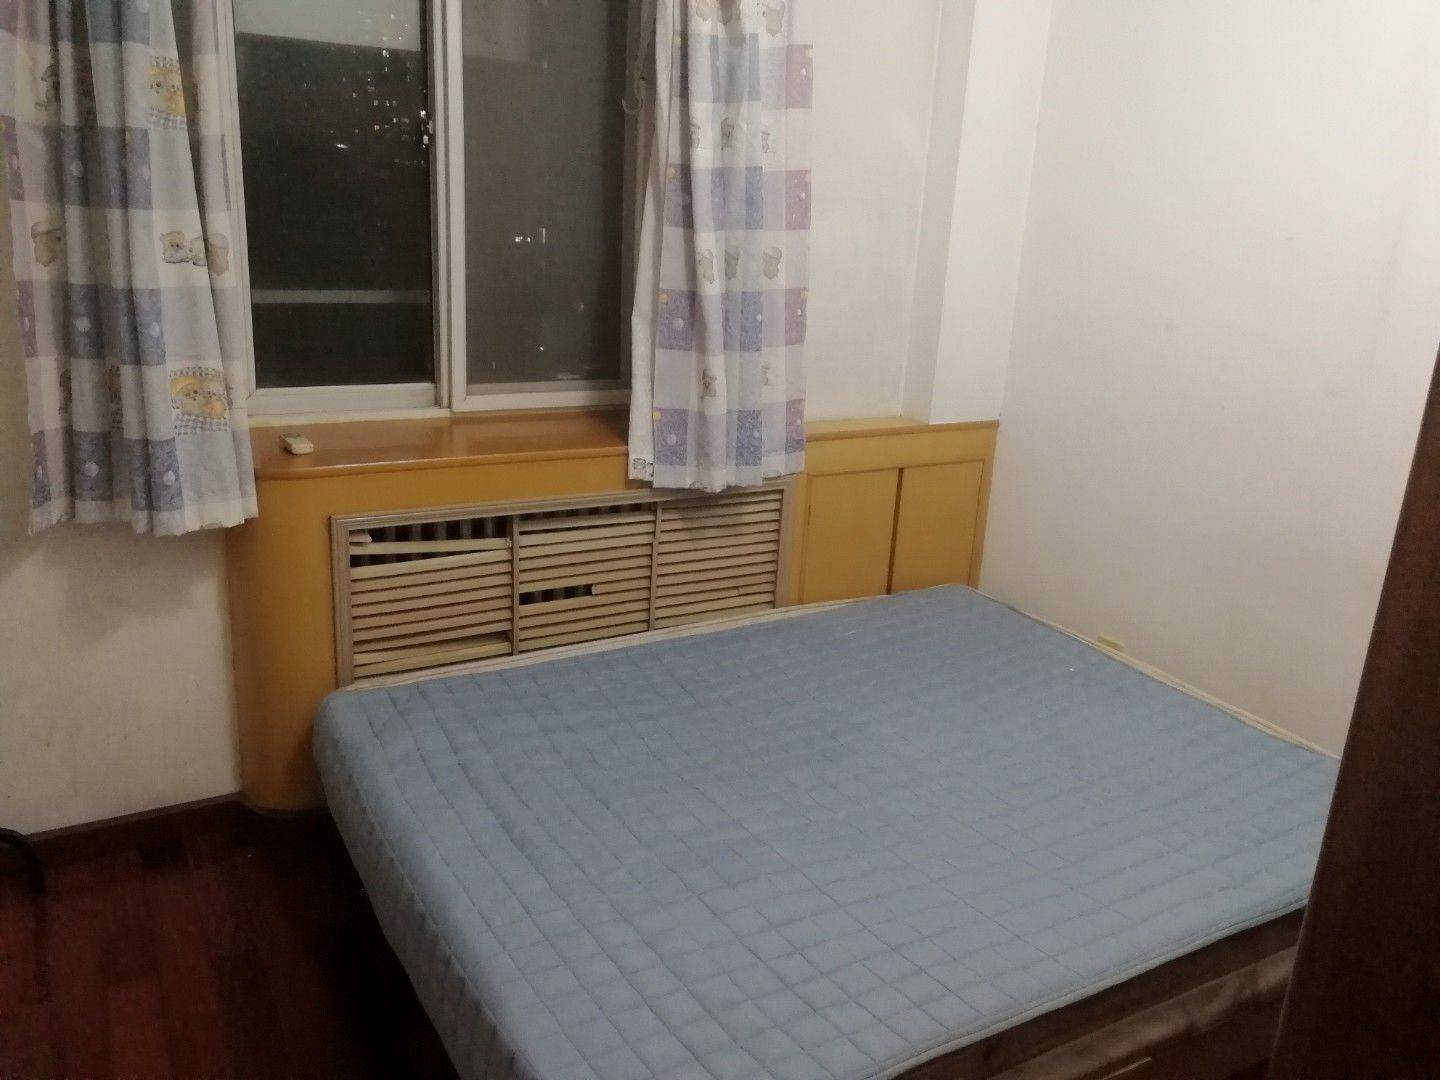 Beijing-Tongzhou-85RMB/Night,Cozy Home,Clean&Comfy,No Gender Limit,Hustle & Bustle,Chilled